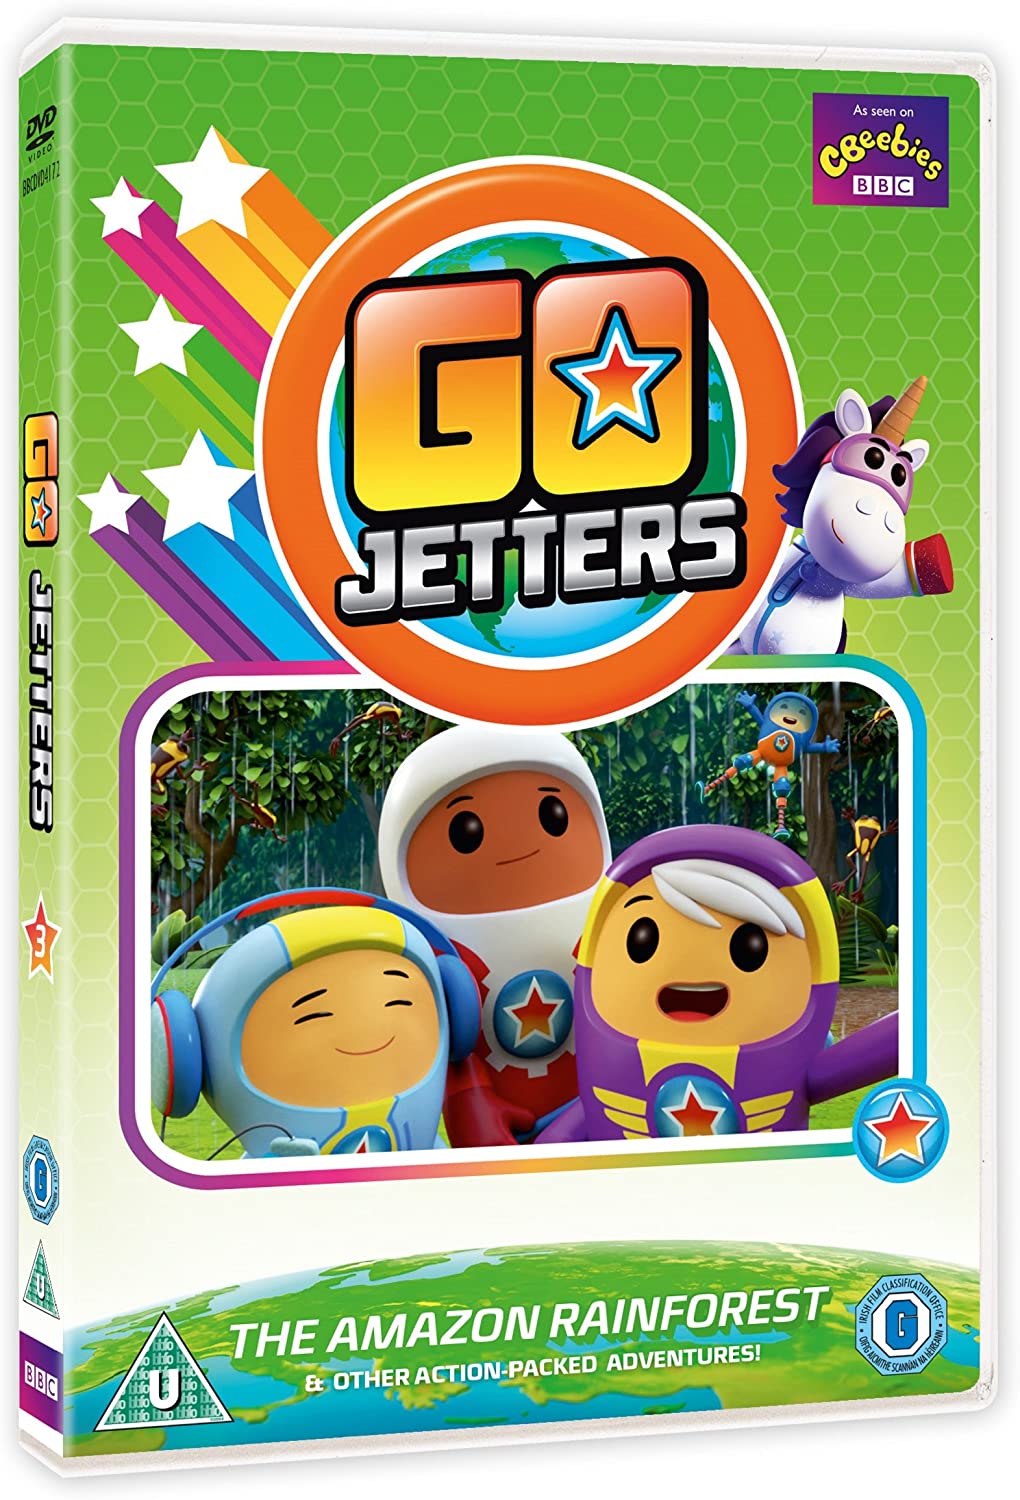 Go Jetters - The Rainforest and Other Adventures [DVD] [2016]